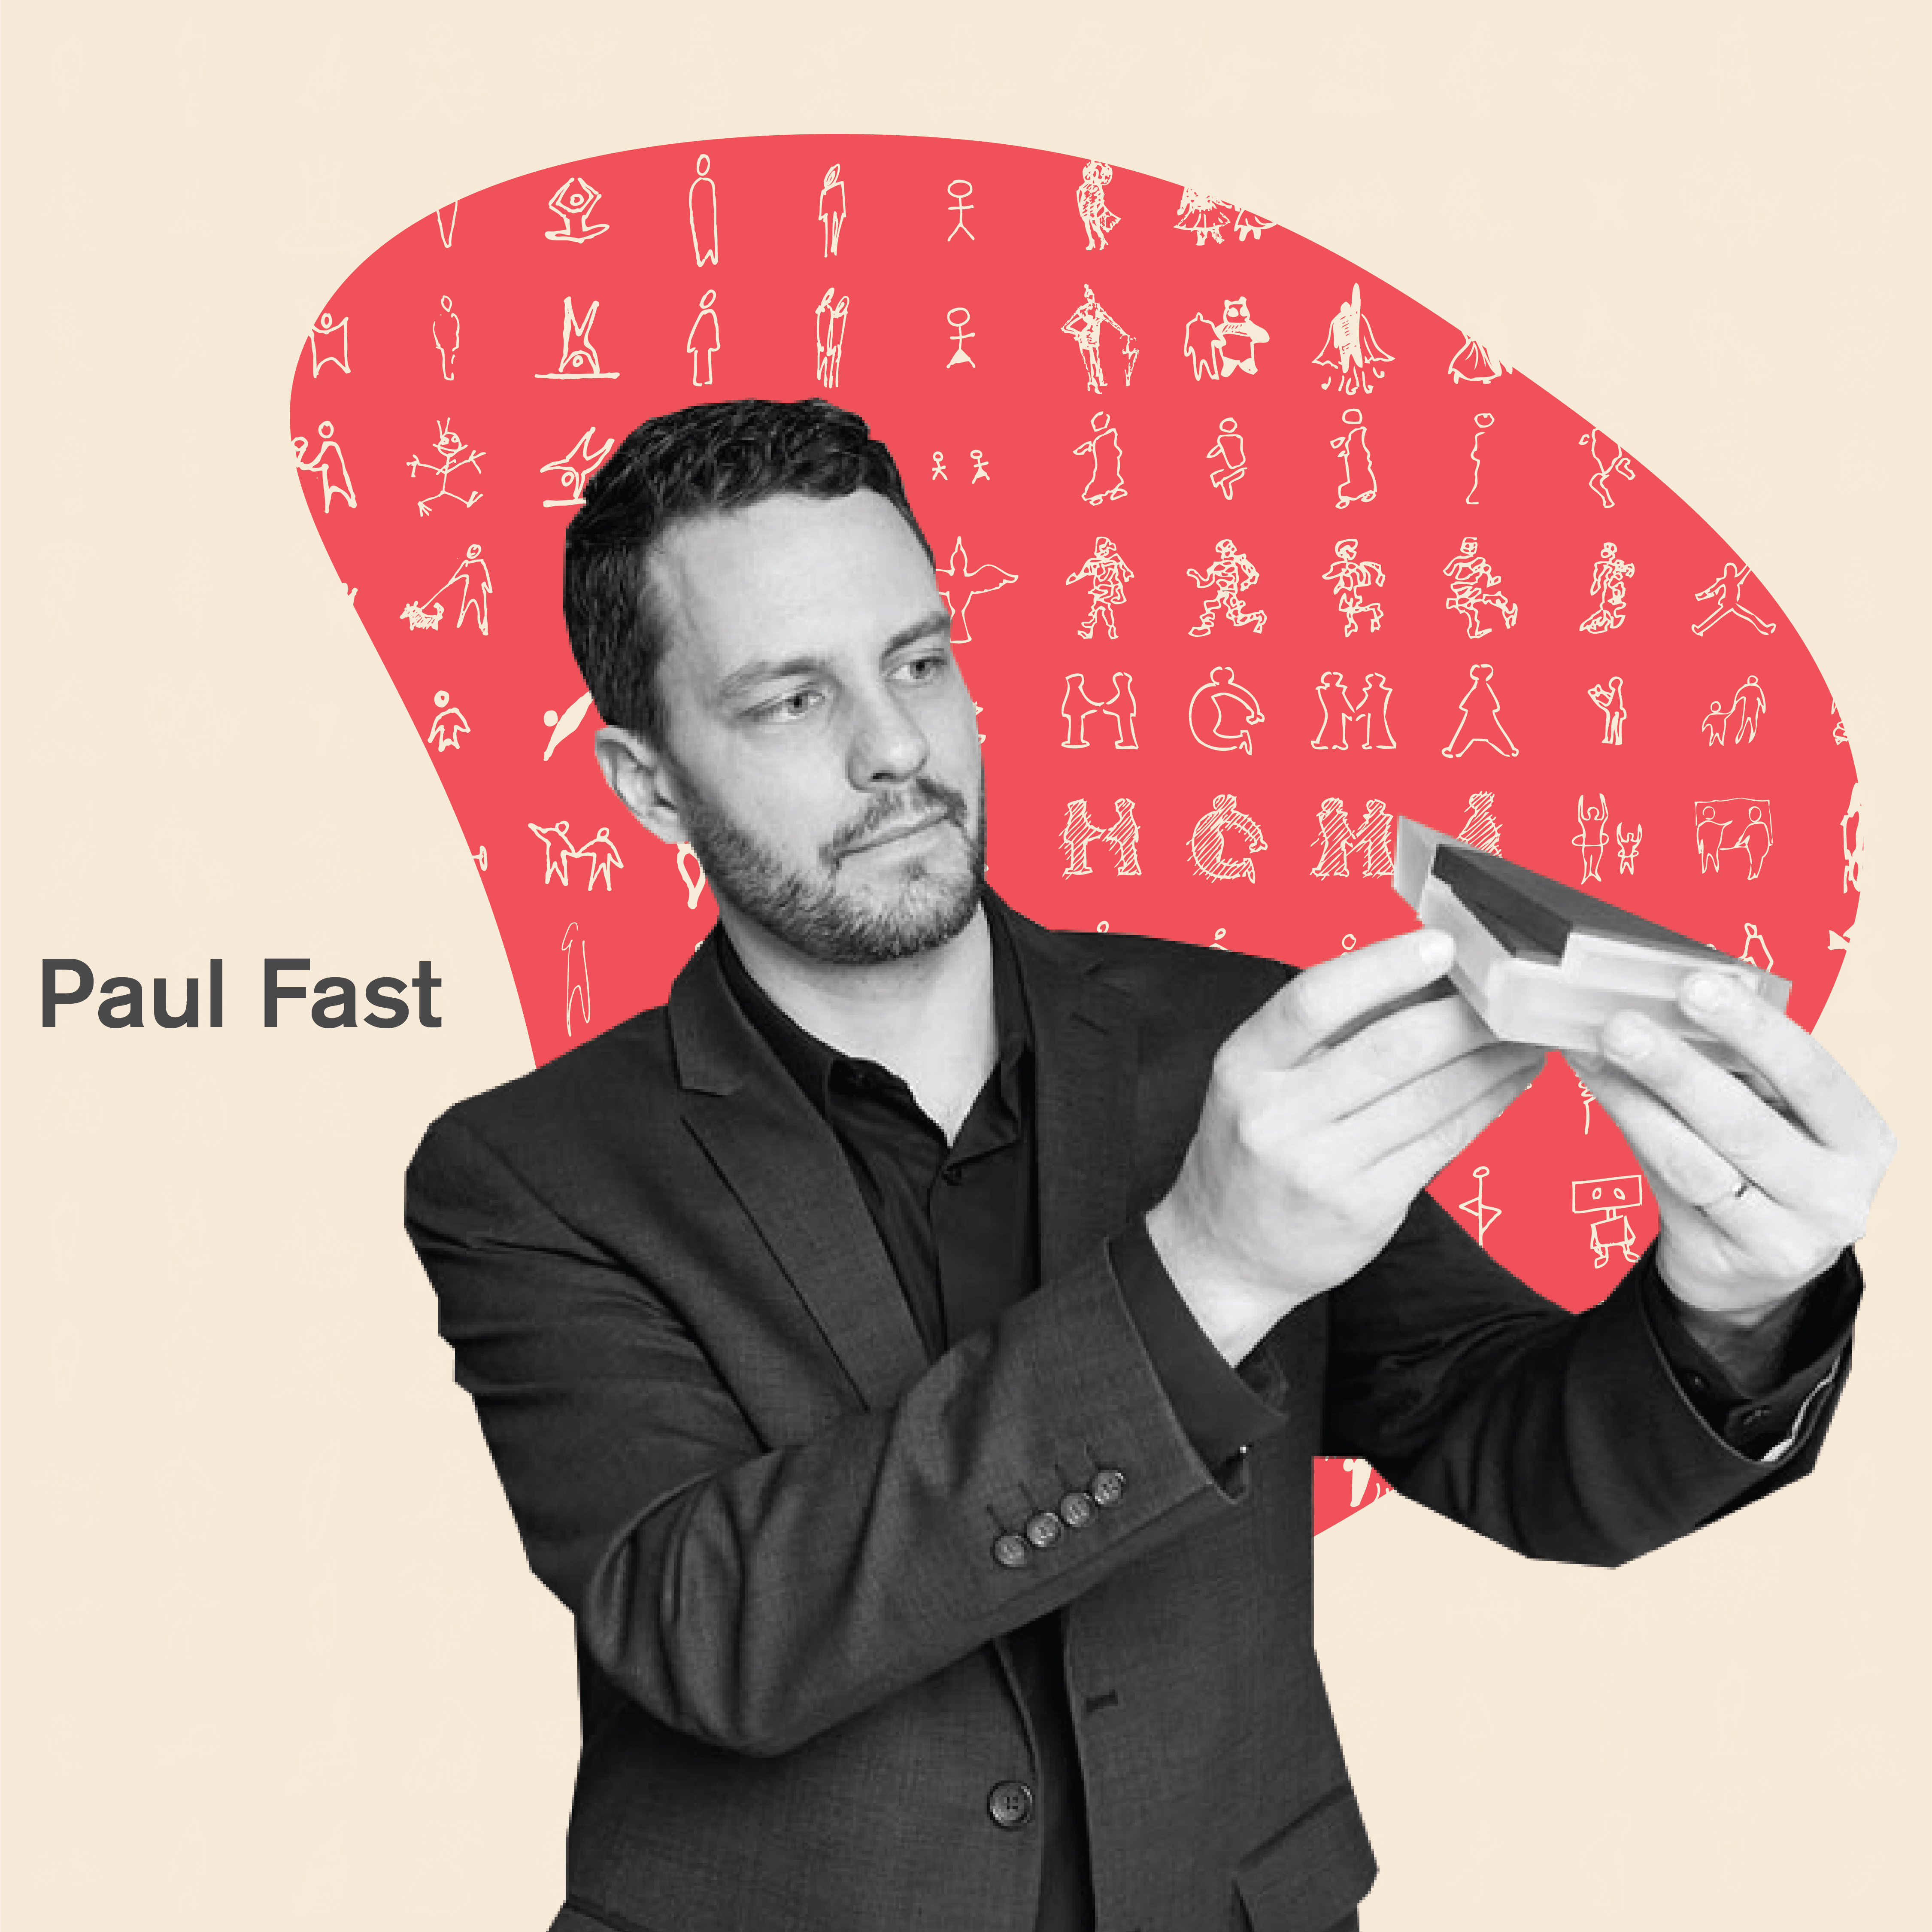 Black and white headshot of Paul Fast looking at an architectural model held in his hands. 